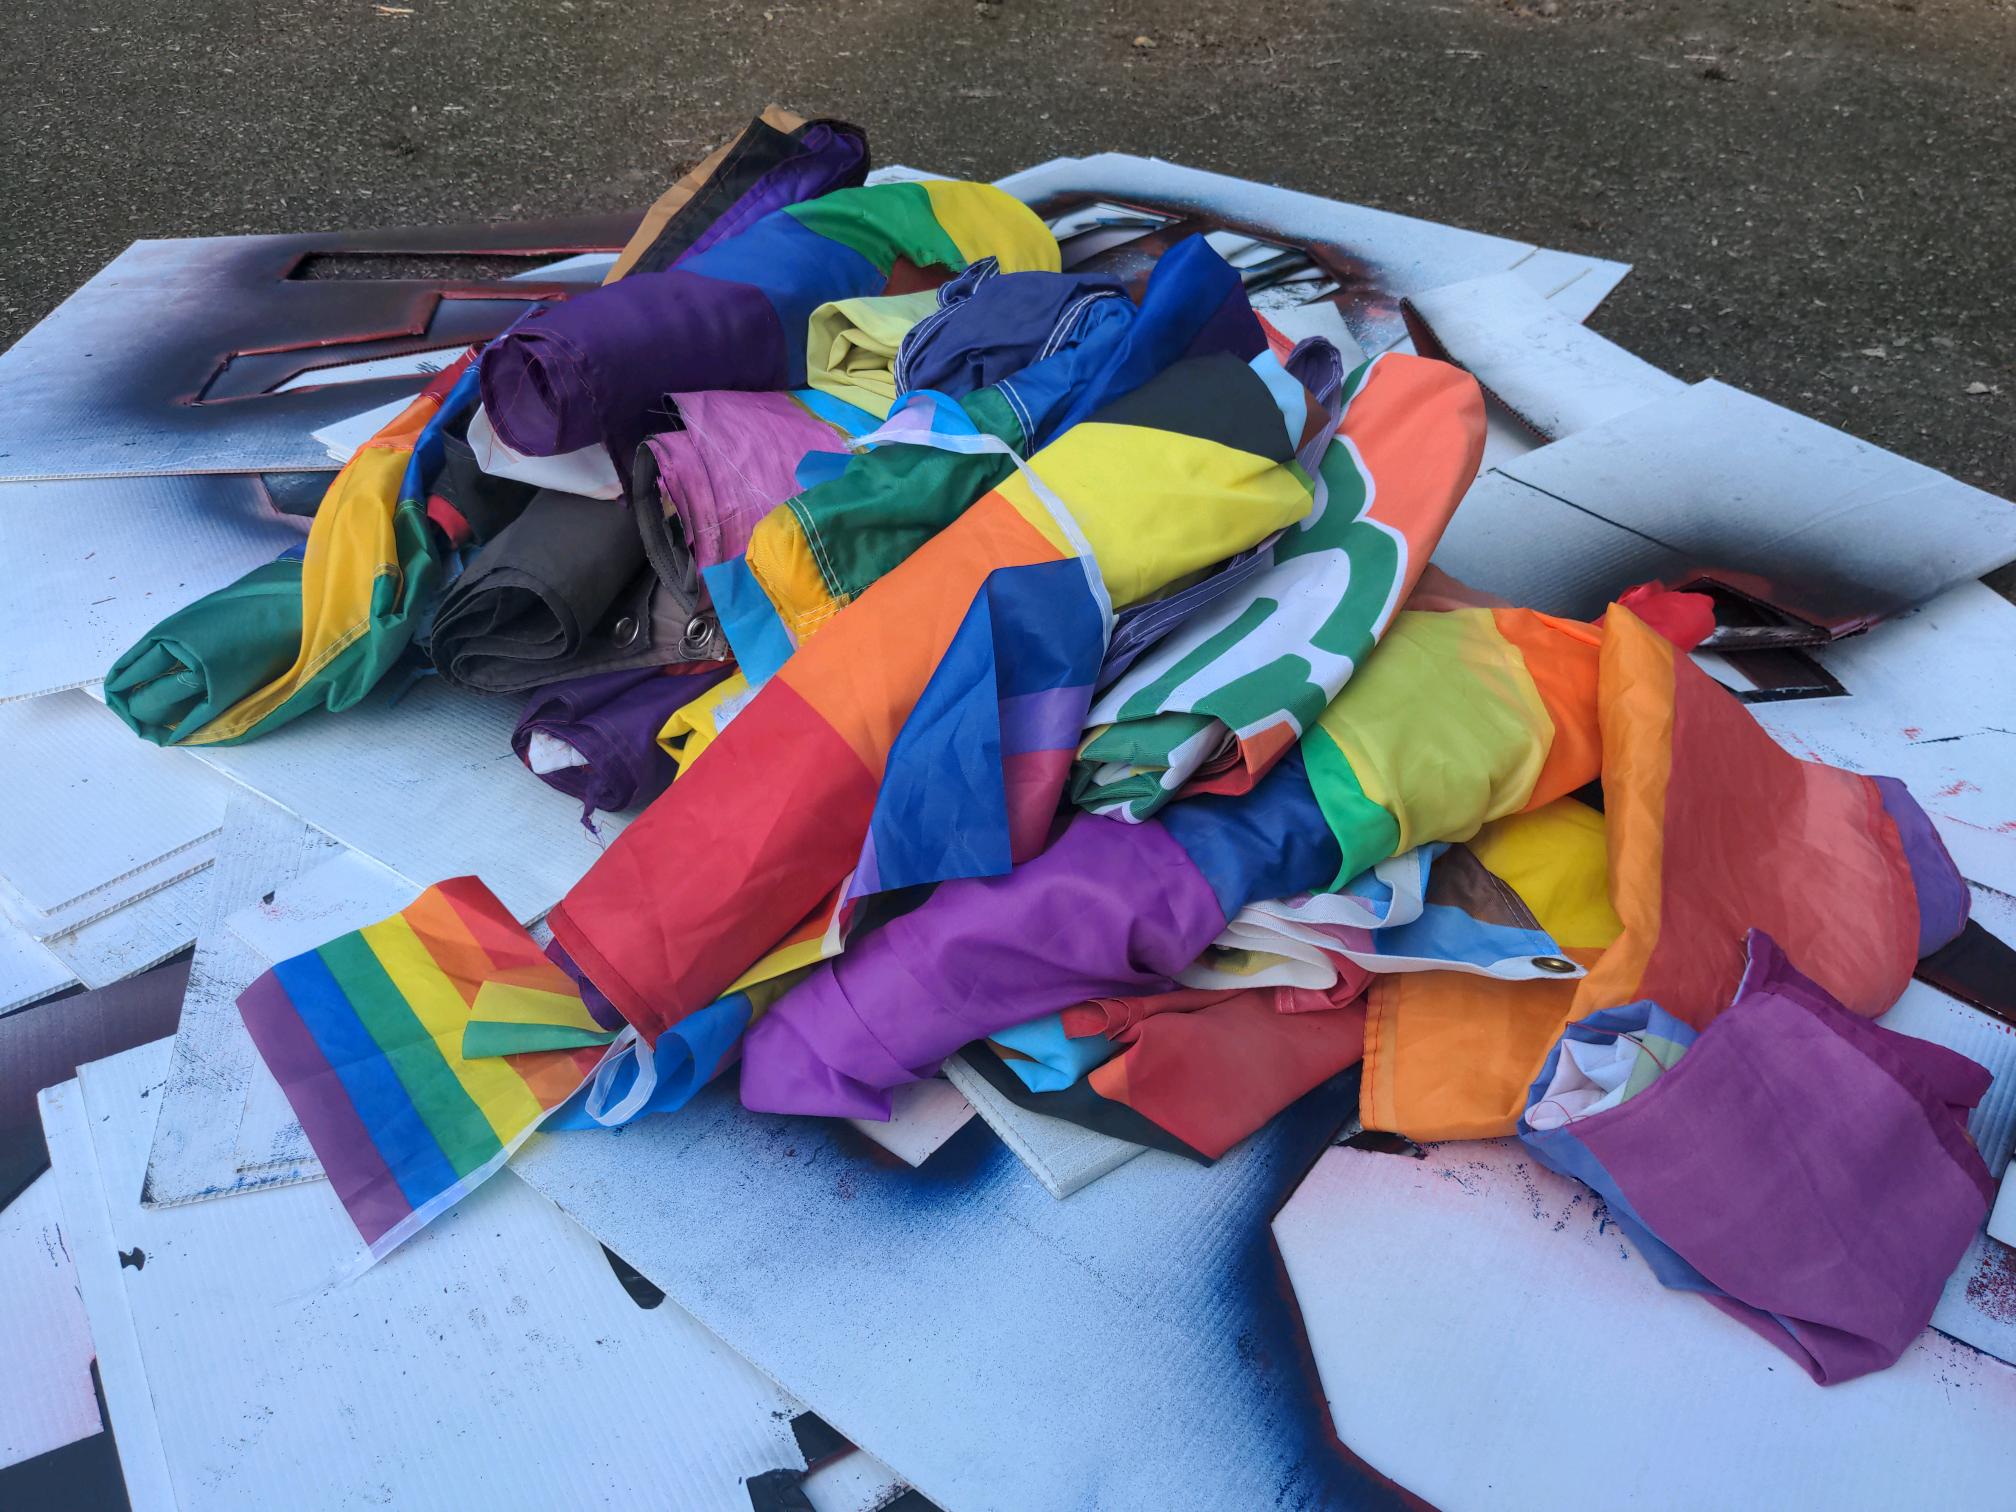 These pride flags are from Bagley's shed and match images Bagley himself posted in private neo-Nazi Telegram channels after the theft. Underneath the flags are large Patriot Front stencils that were also stored in the shed.